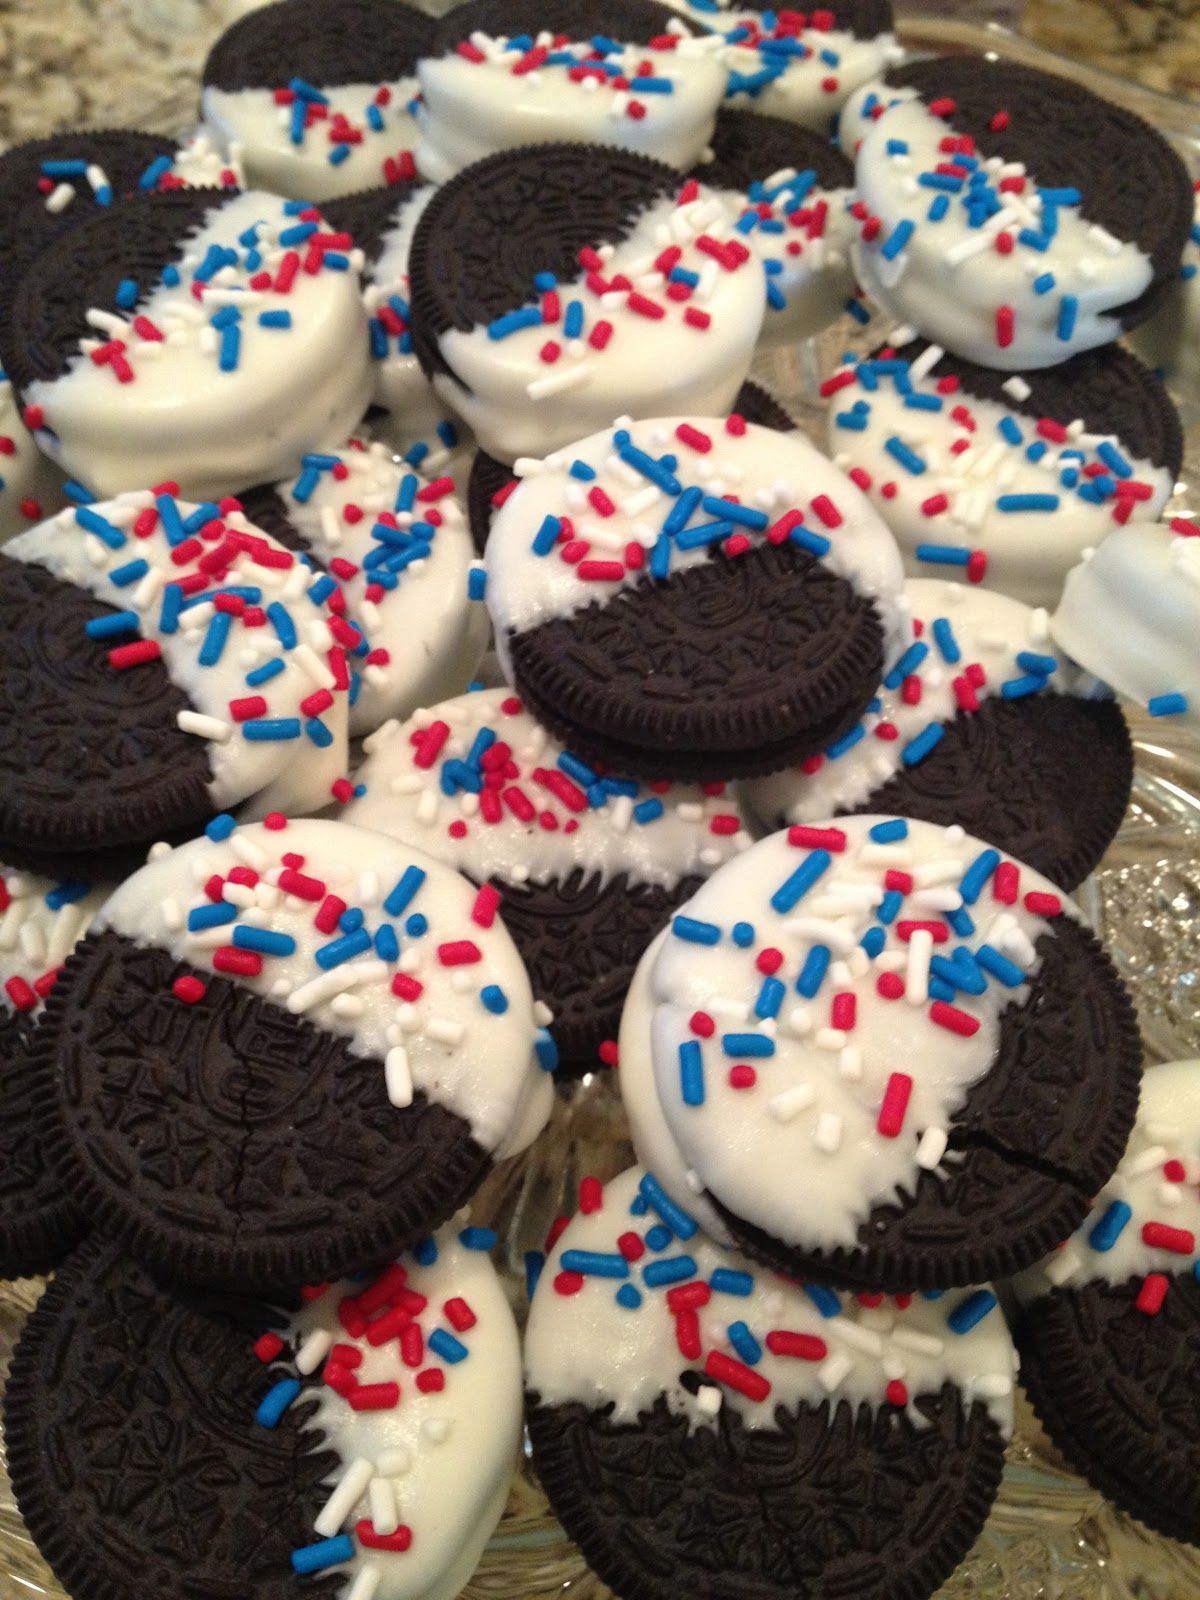 Patriotic Oreos covered in white sprinkled with red and blue. Sounds like a recipe for Memorial Day